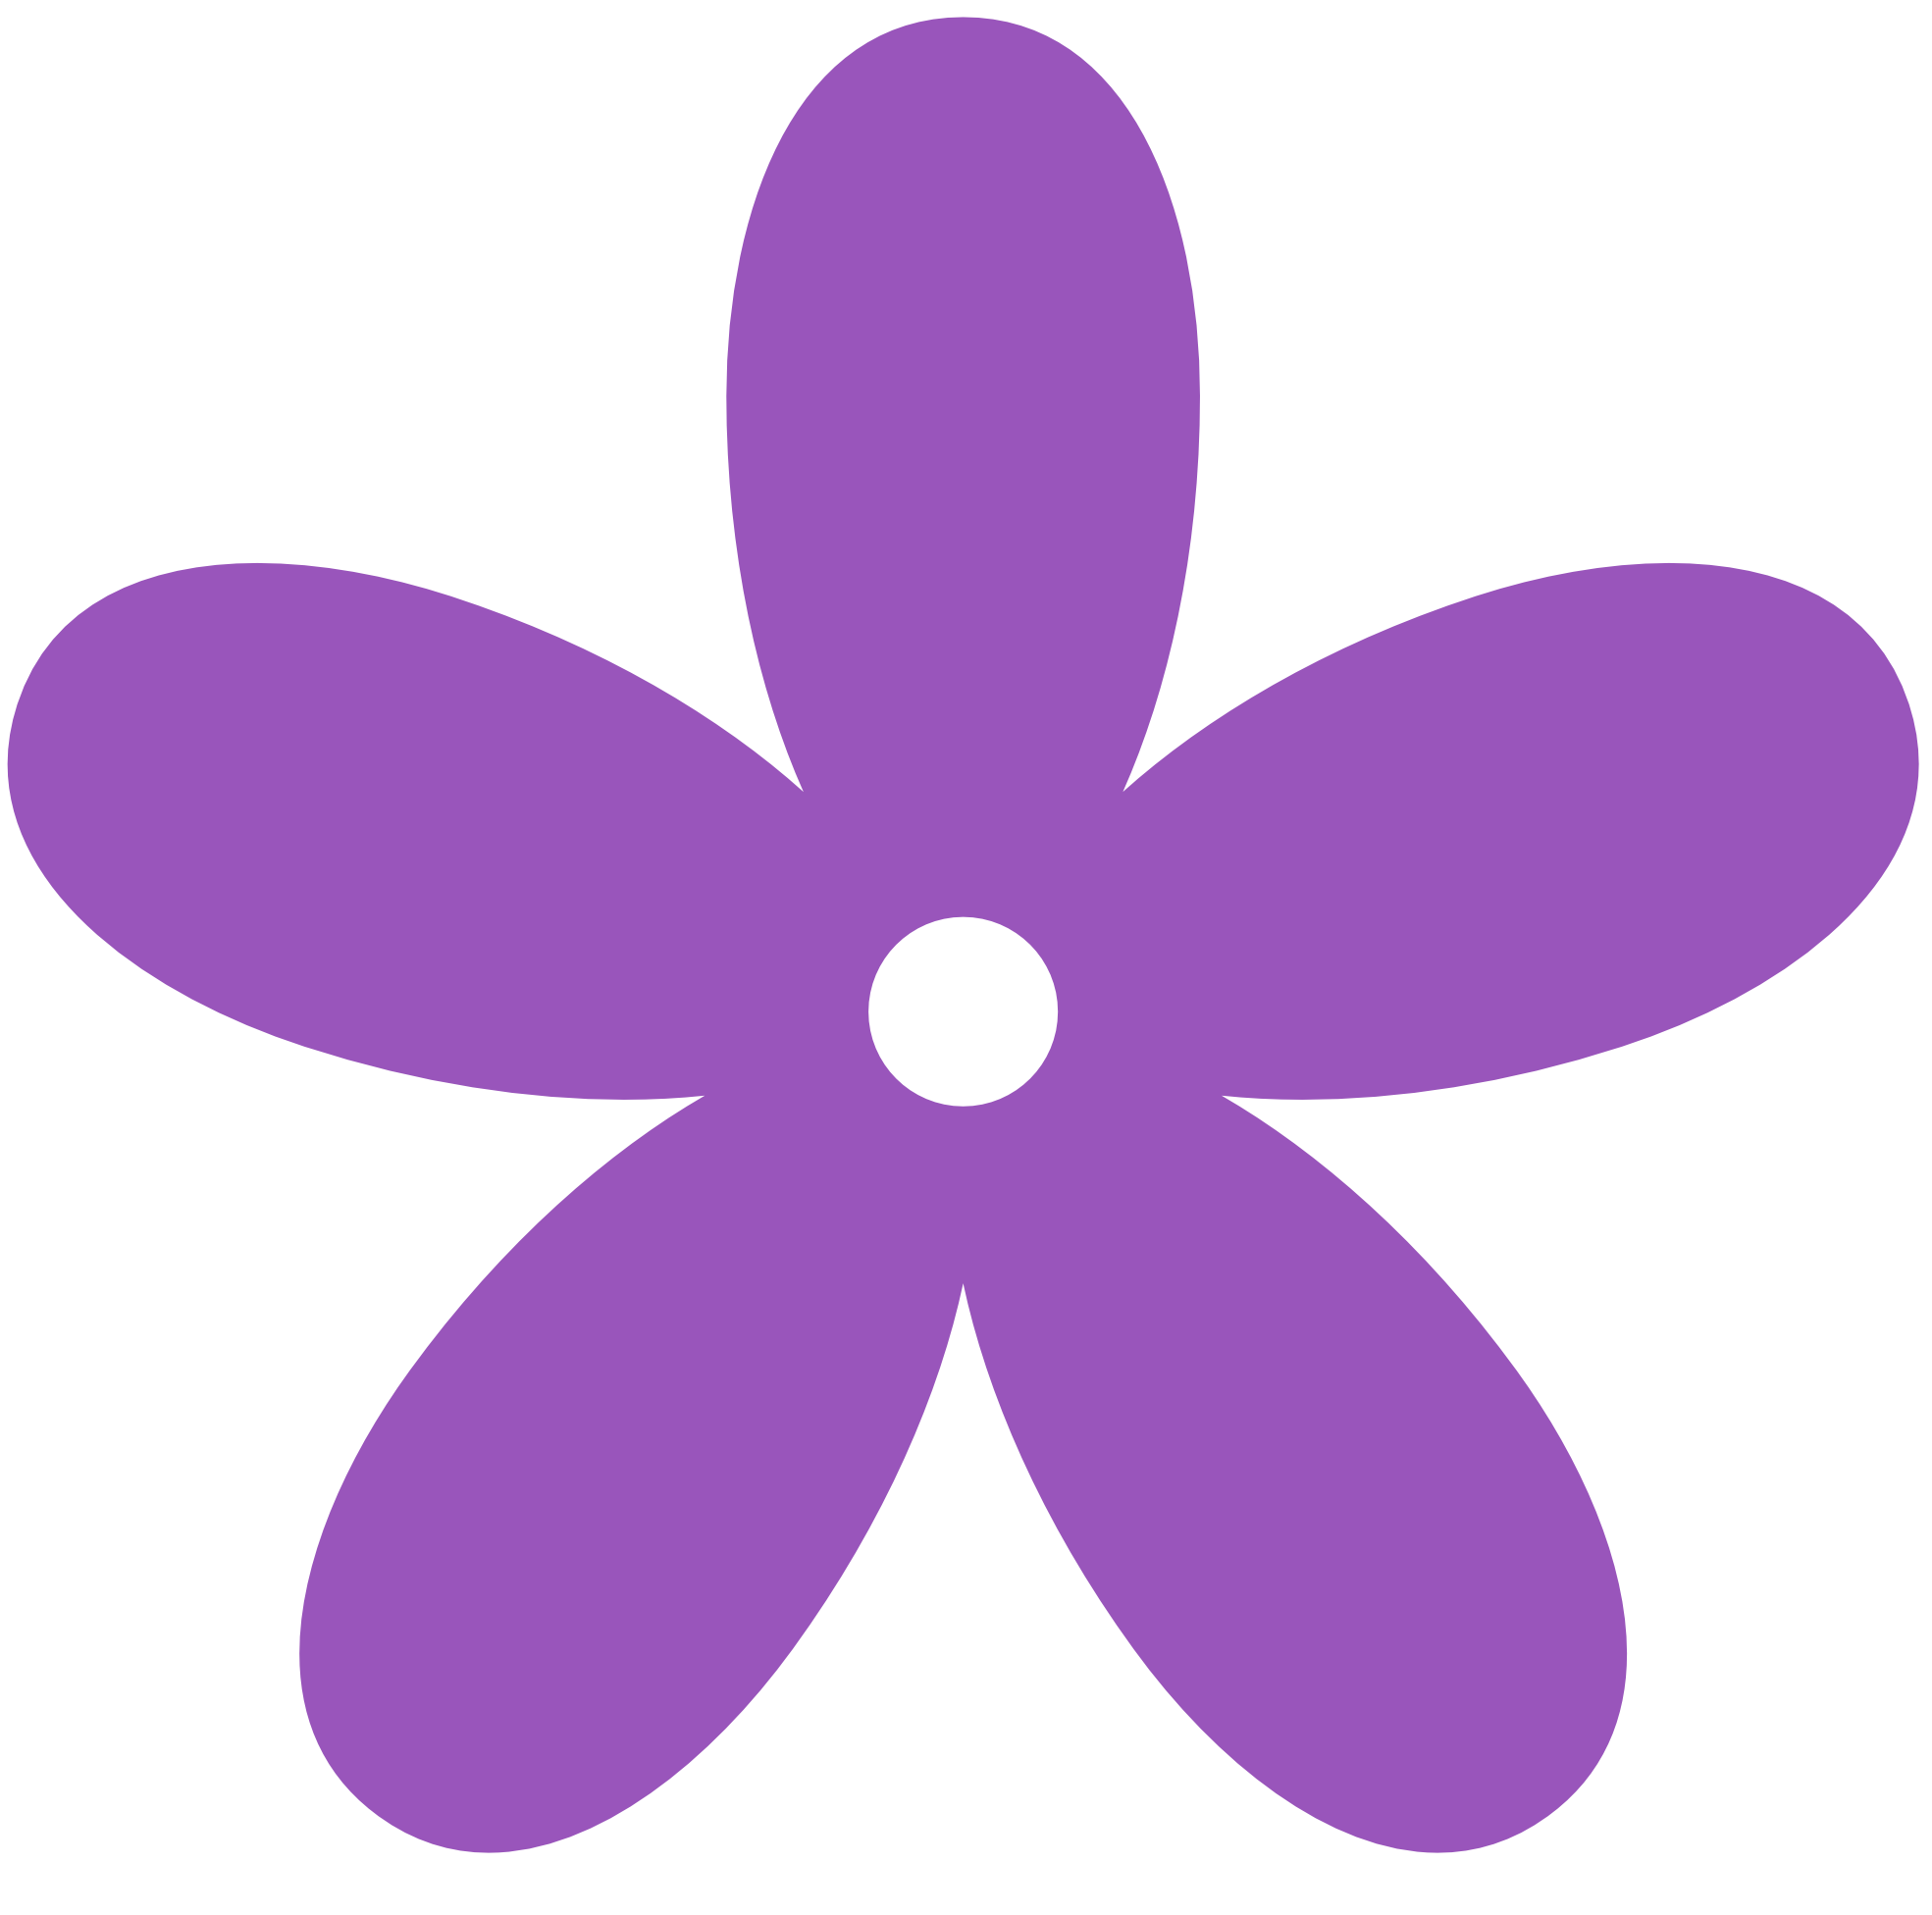 Clipart flower shape. Cross with flowers at